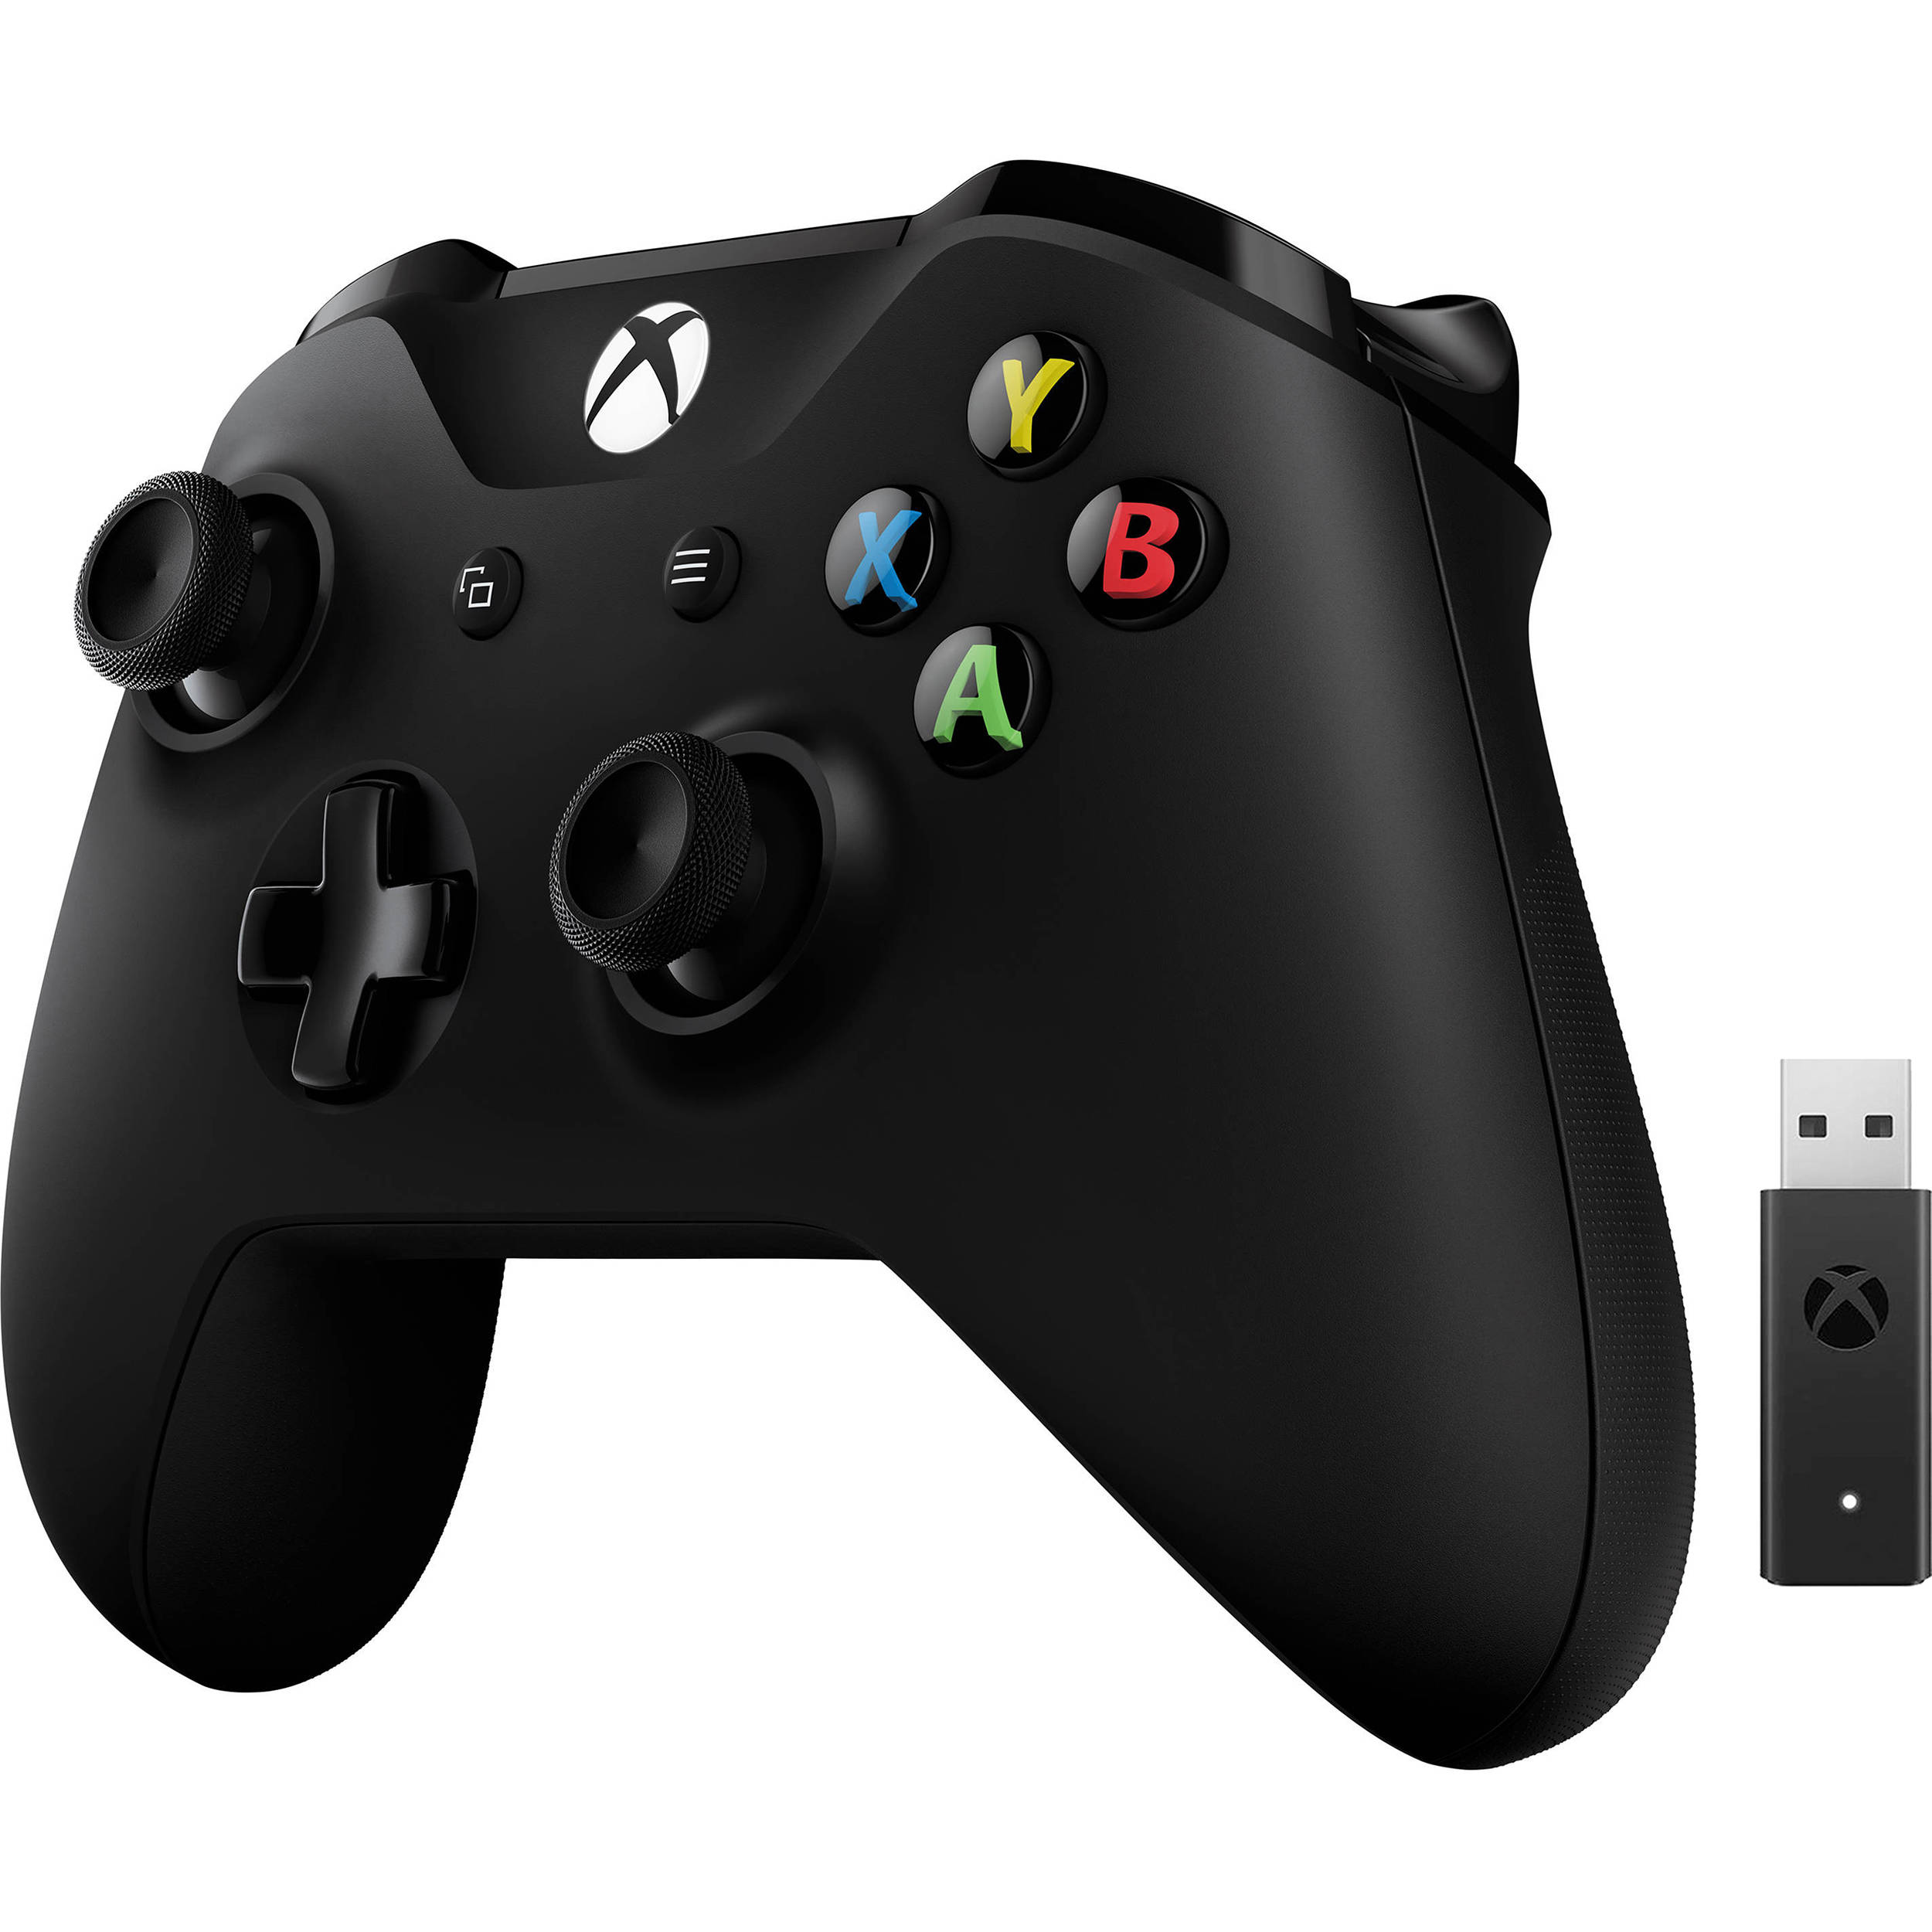 which xbox controllers have headphone jack